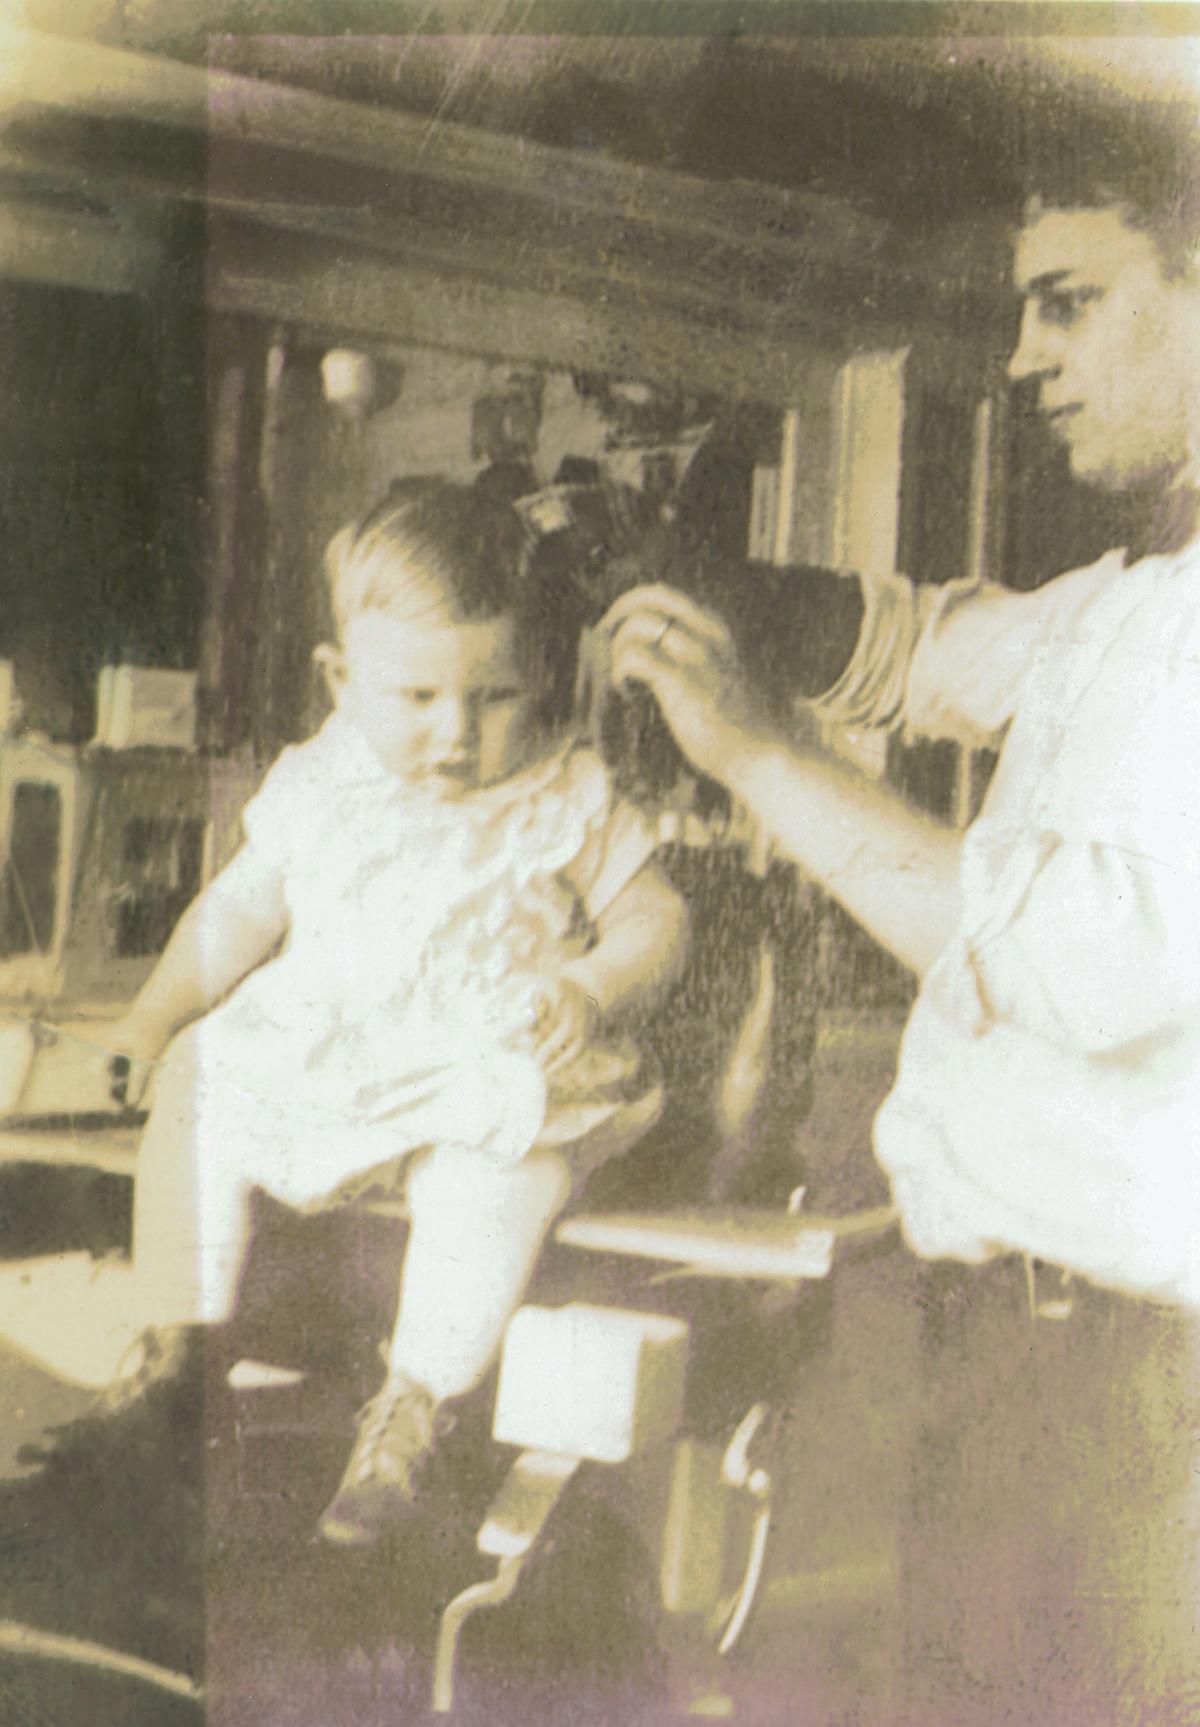 Robert Rohloff's father giving him a haircut in 1929. (Courtesy of Mark Karweick)